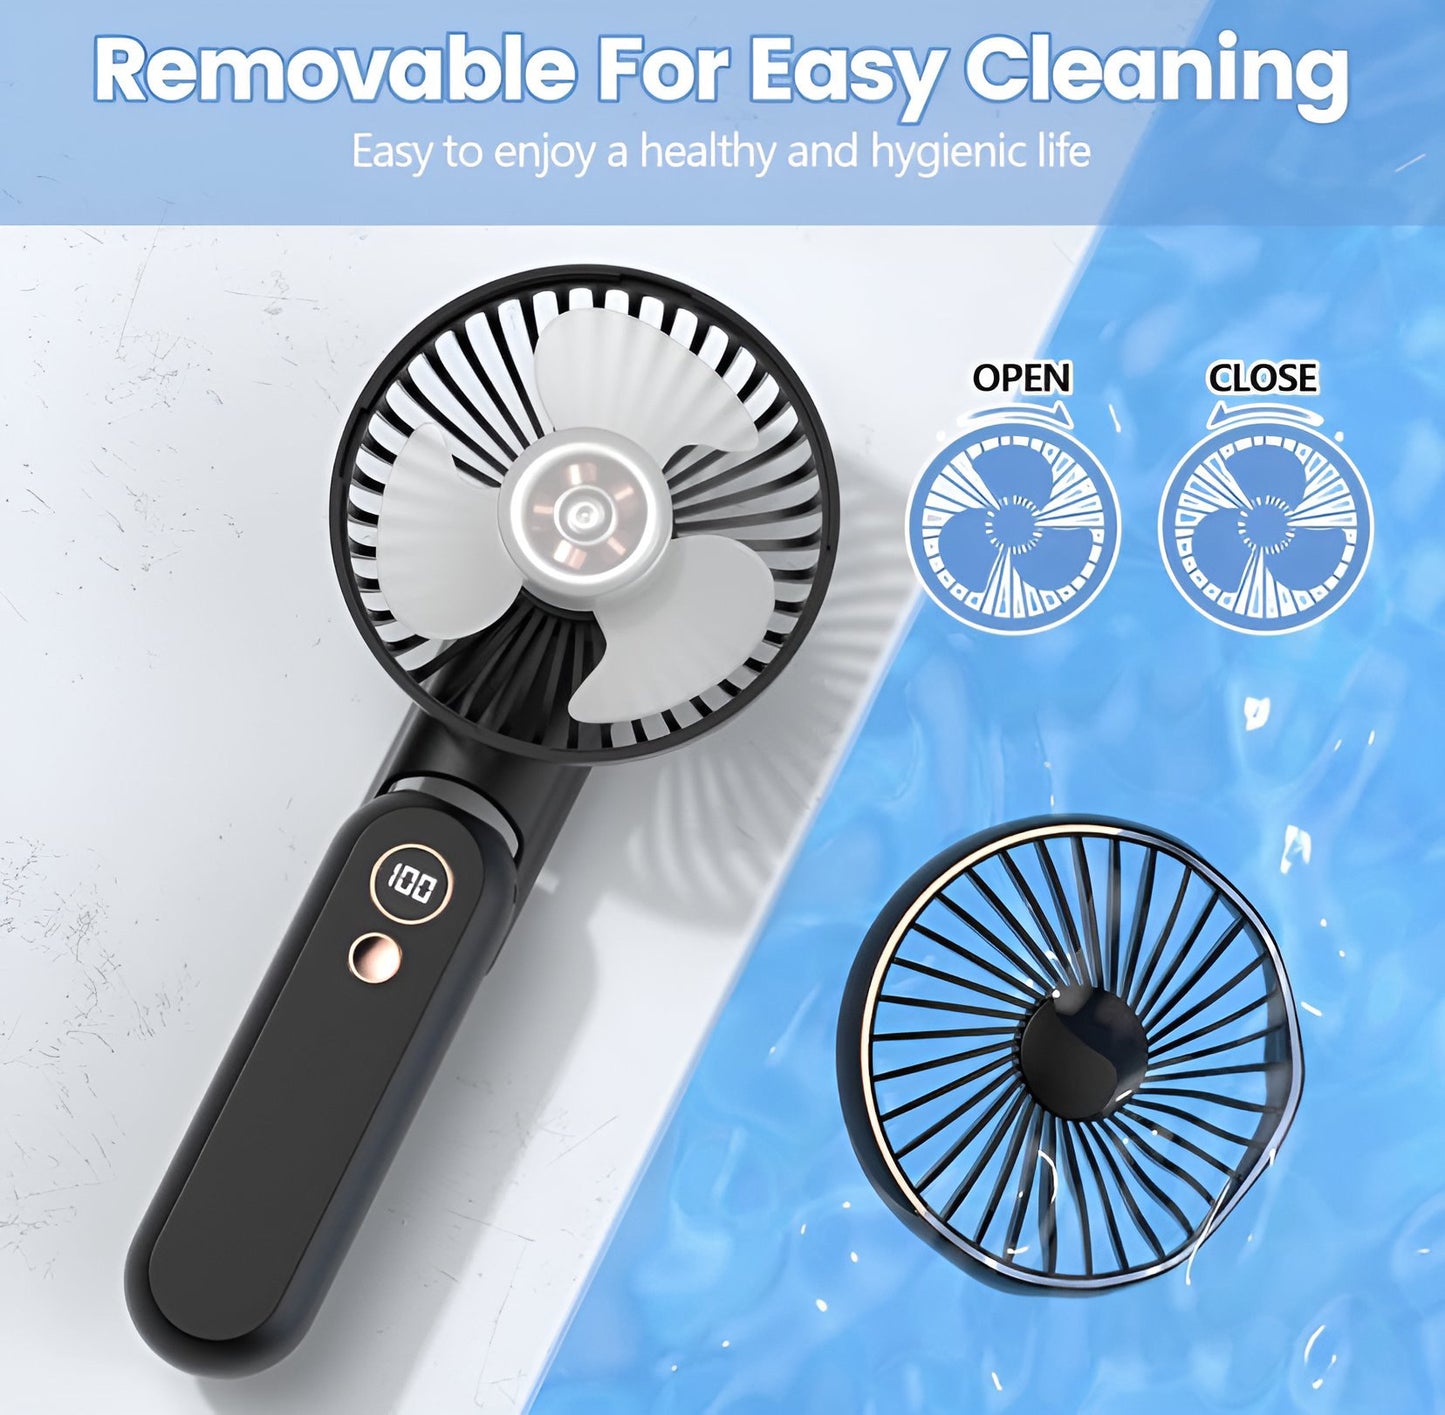 Compact and Sleek 3-in-1 Portable Fan with Power Bank